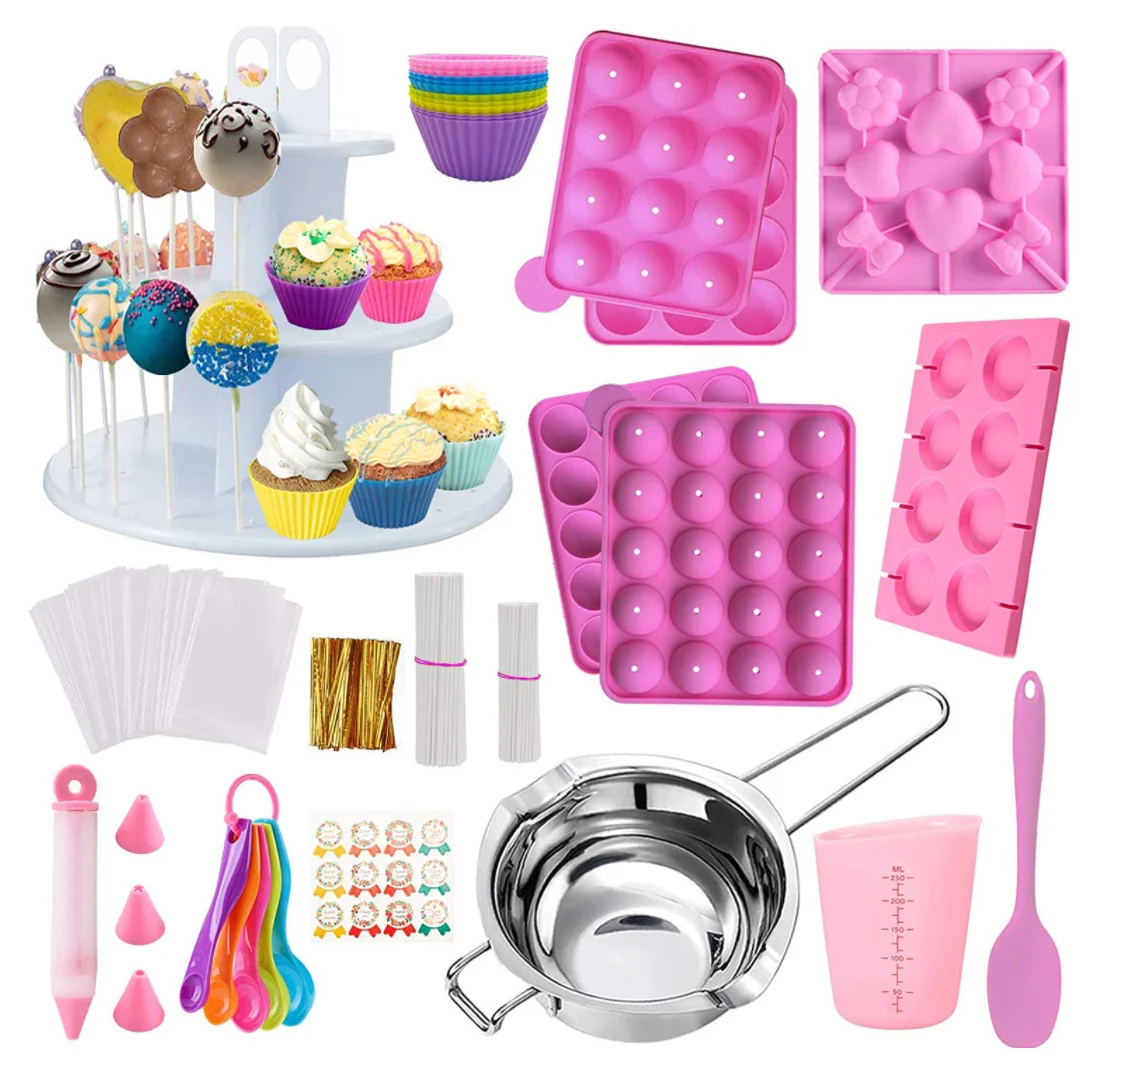 Amazon 454 piece silicone lollipop mold tools 454 pcs set candy diy mold display stand baking tools/cake decorating kit tools